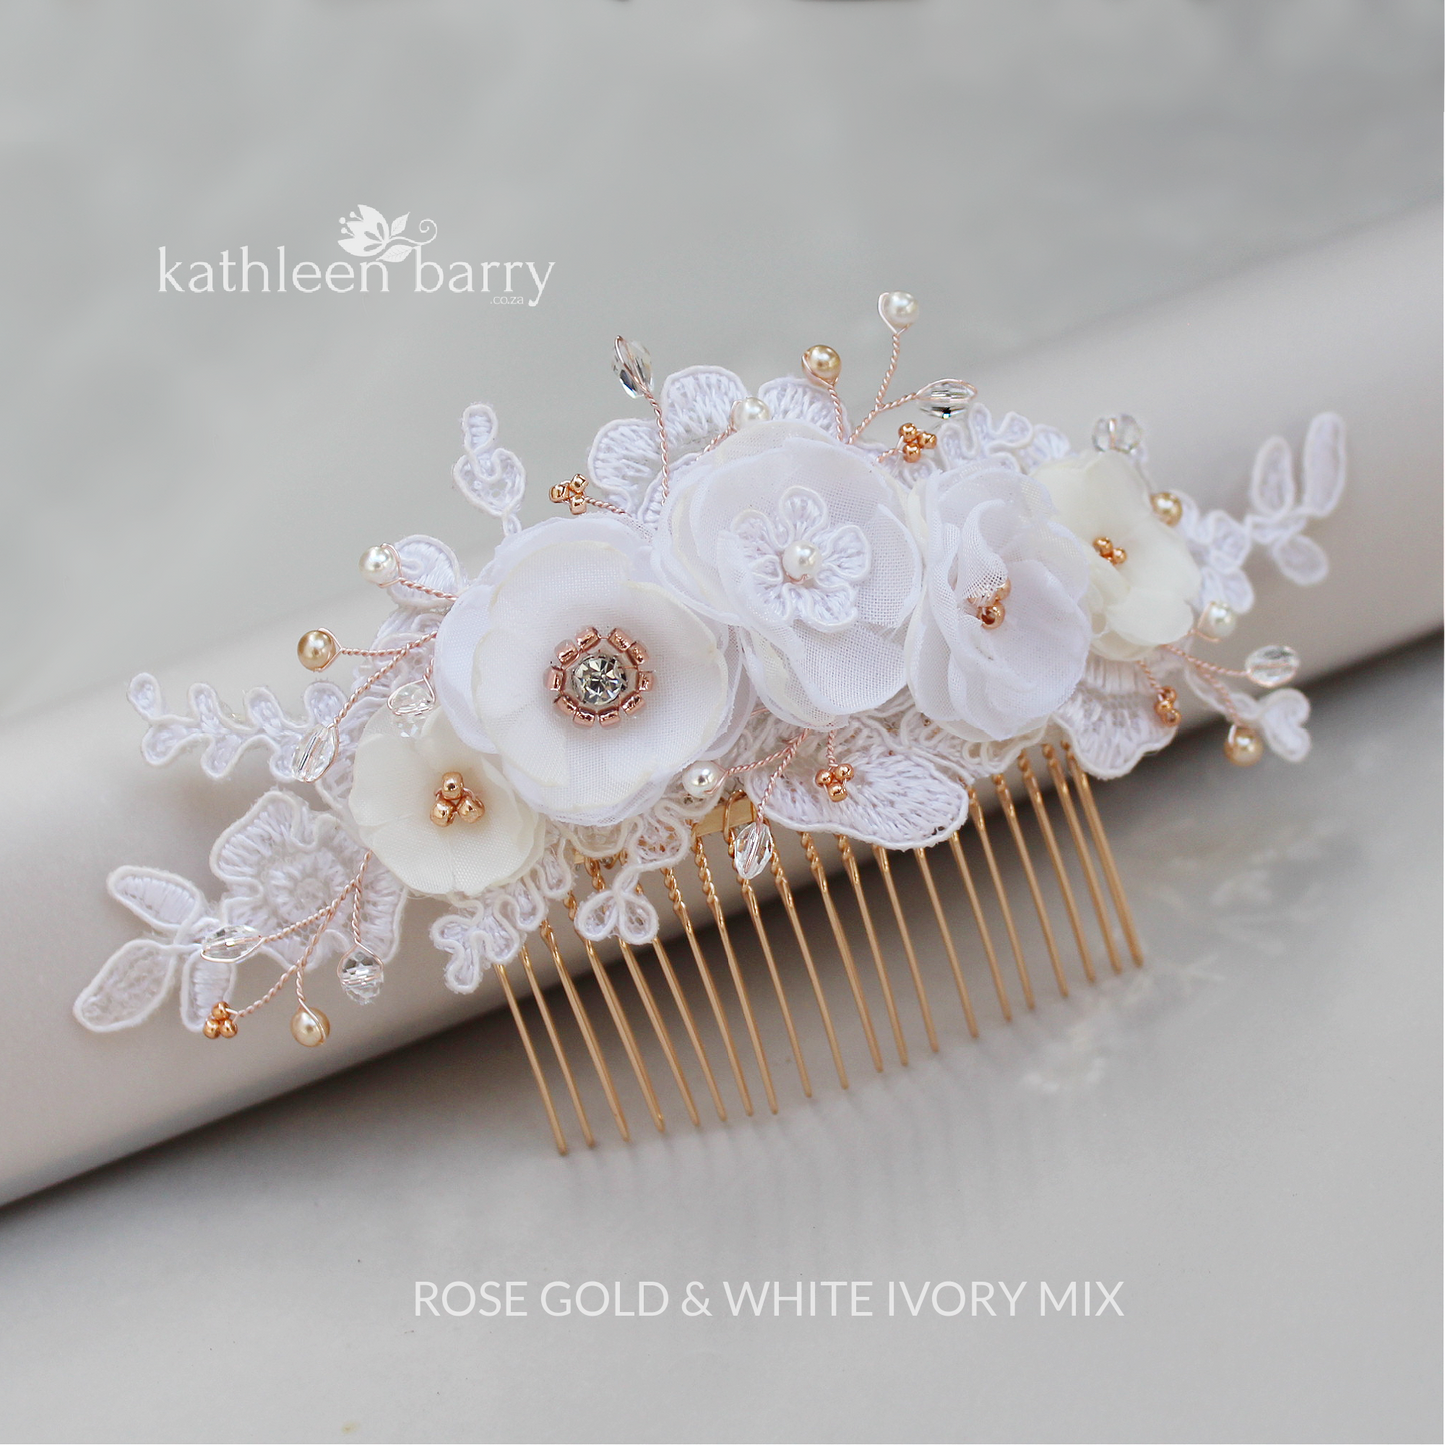 Linda Floral Cafe Latte Lace Bridal Hair Veil Comb, Luxury handmade Flowers, Crystals & Pearls - custom colors available